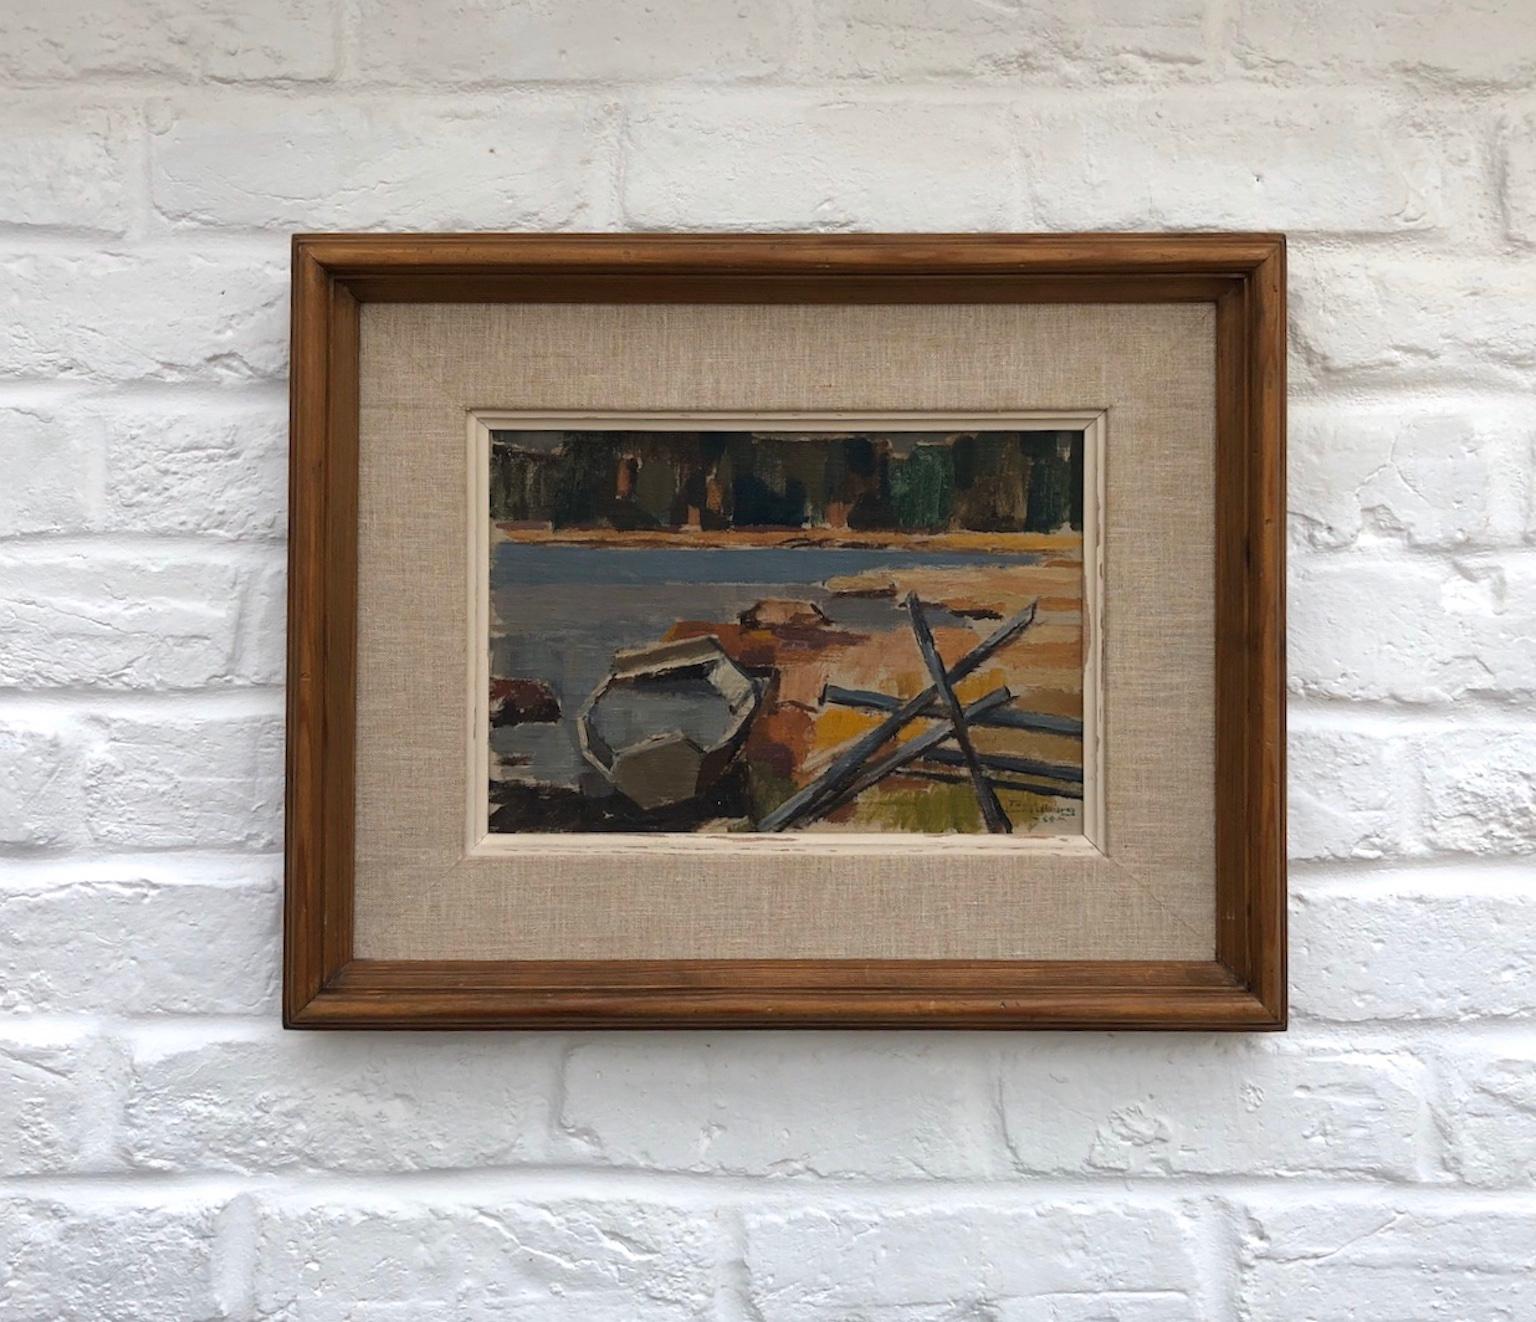 Mid-Century Modern oil painting by Tore Lundborg, Swedish, 1955.

Beautiful muted colors depicting slightly abstract landscape with boat. Signed and dated bottom RH corner. Oil on board. Original natural pine wood and linen frame.

Tore Anders